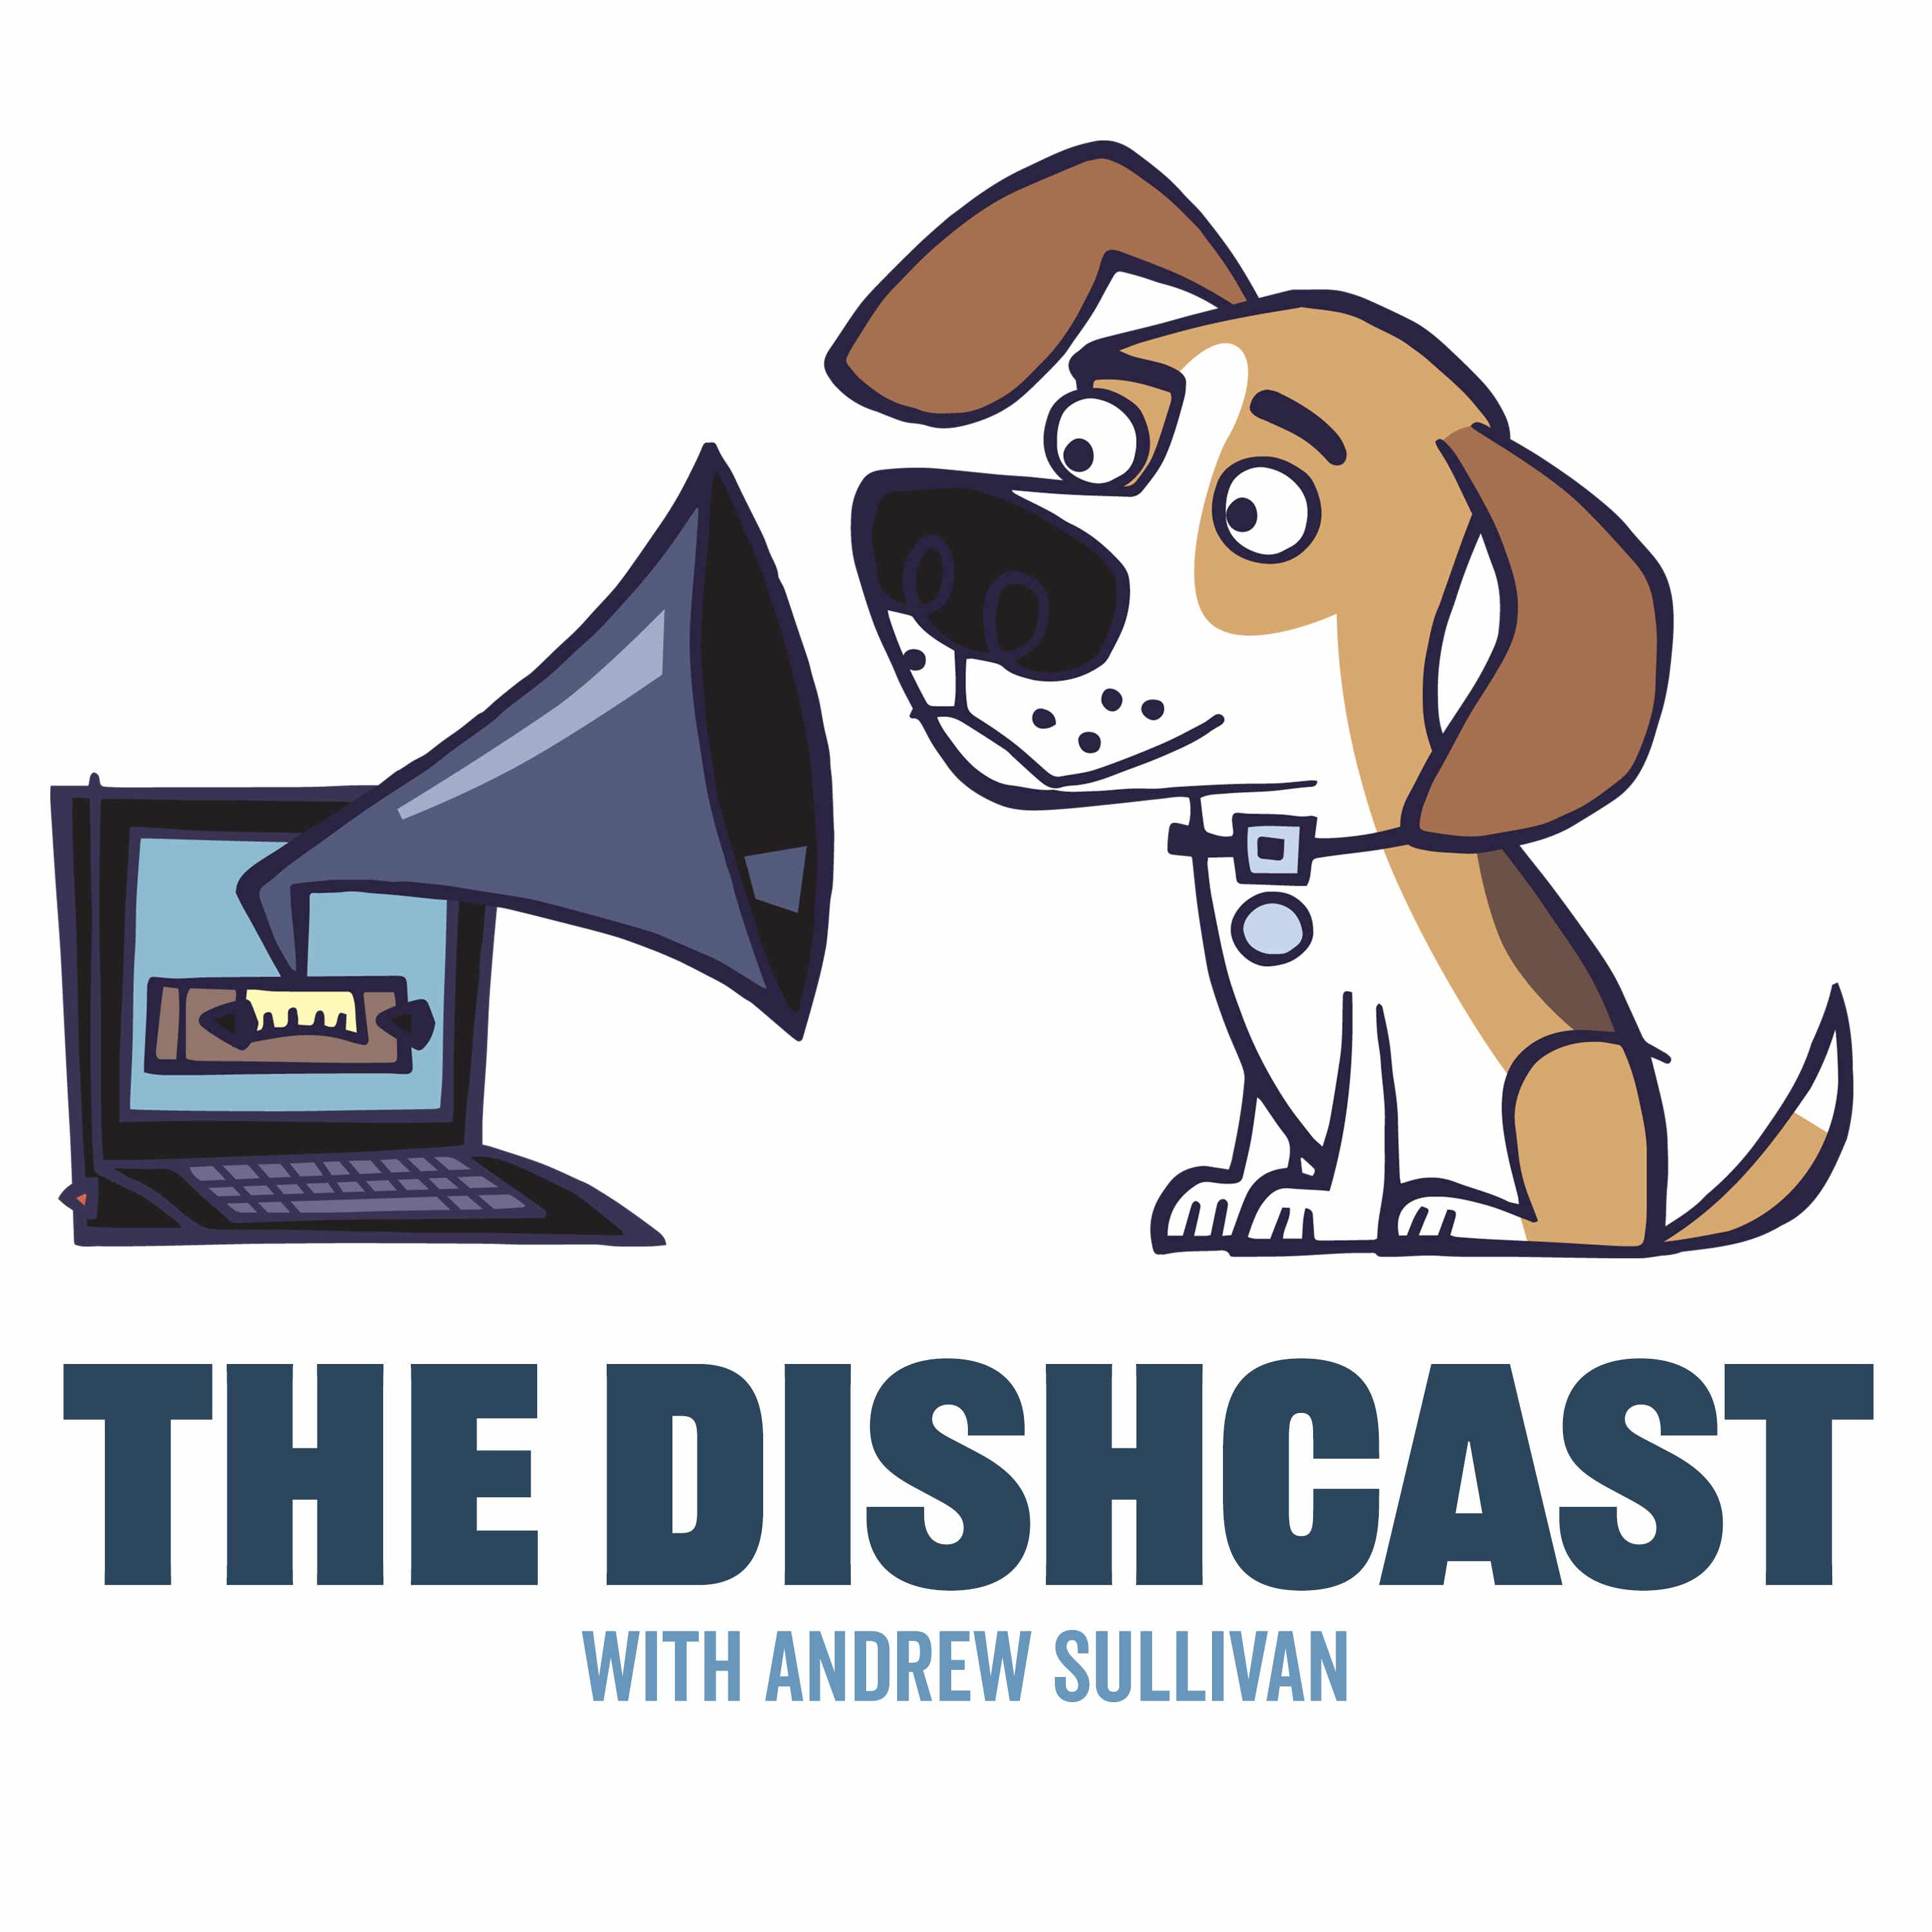 The Dishcast with Andrew Sullivan (private feed for larryjerusalem@gmail.com)